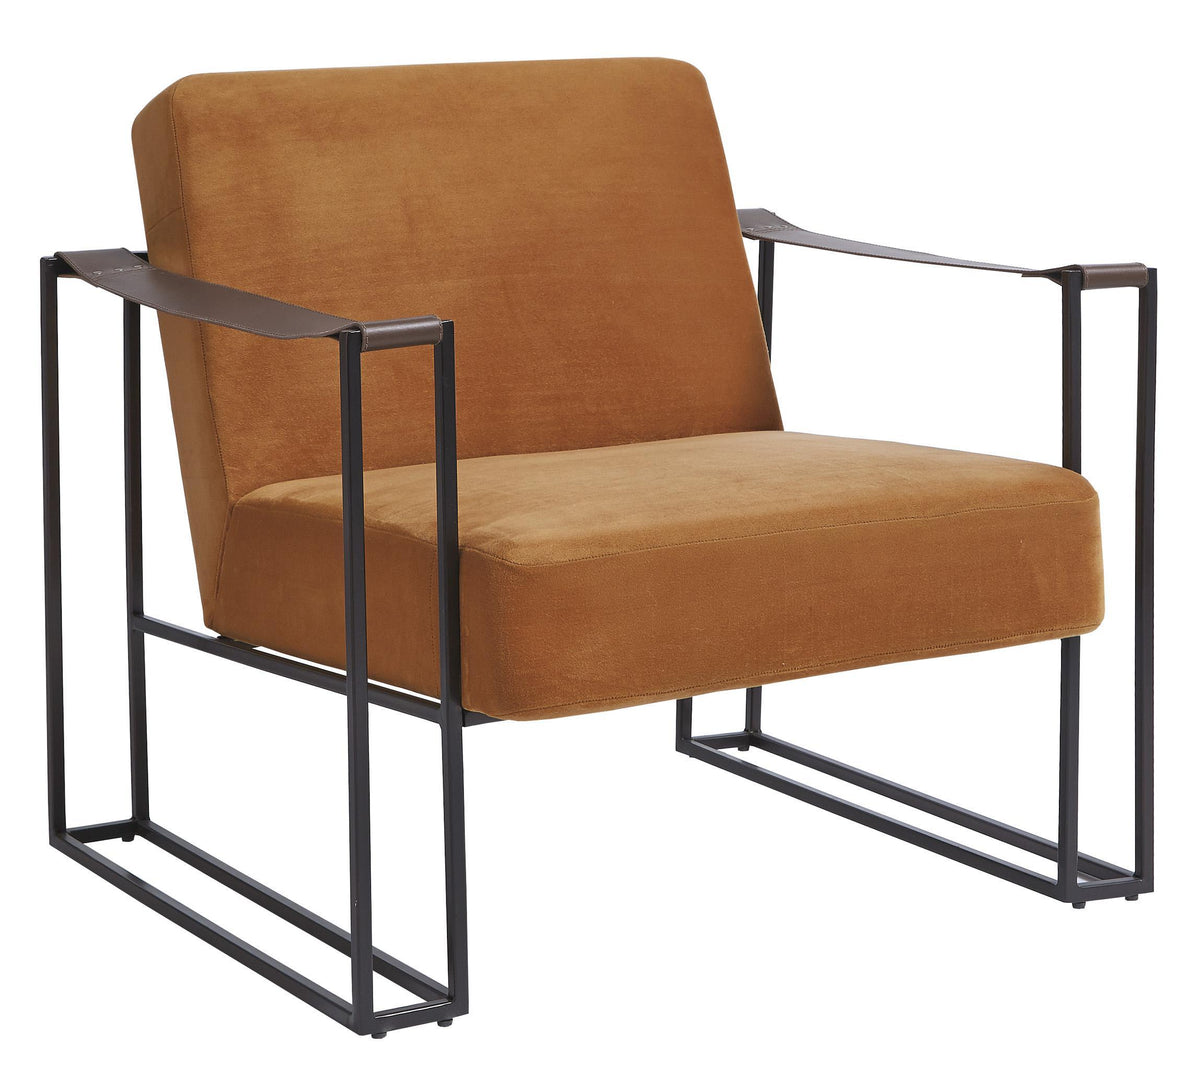 Metal Frame Accent Chair with Padded Seat and Back, Orange and Bronze - BM207144